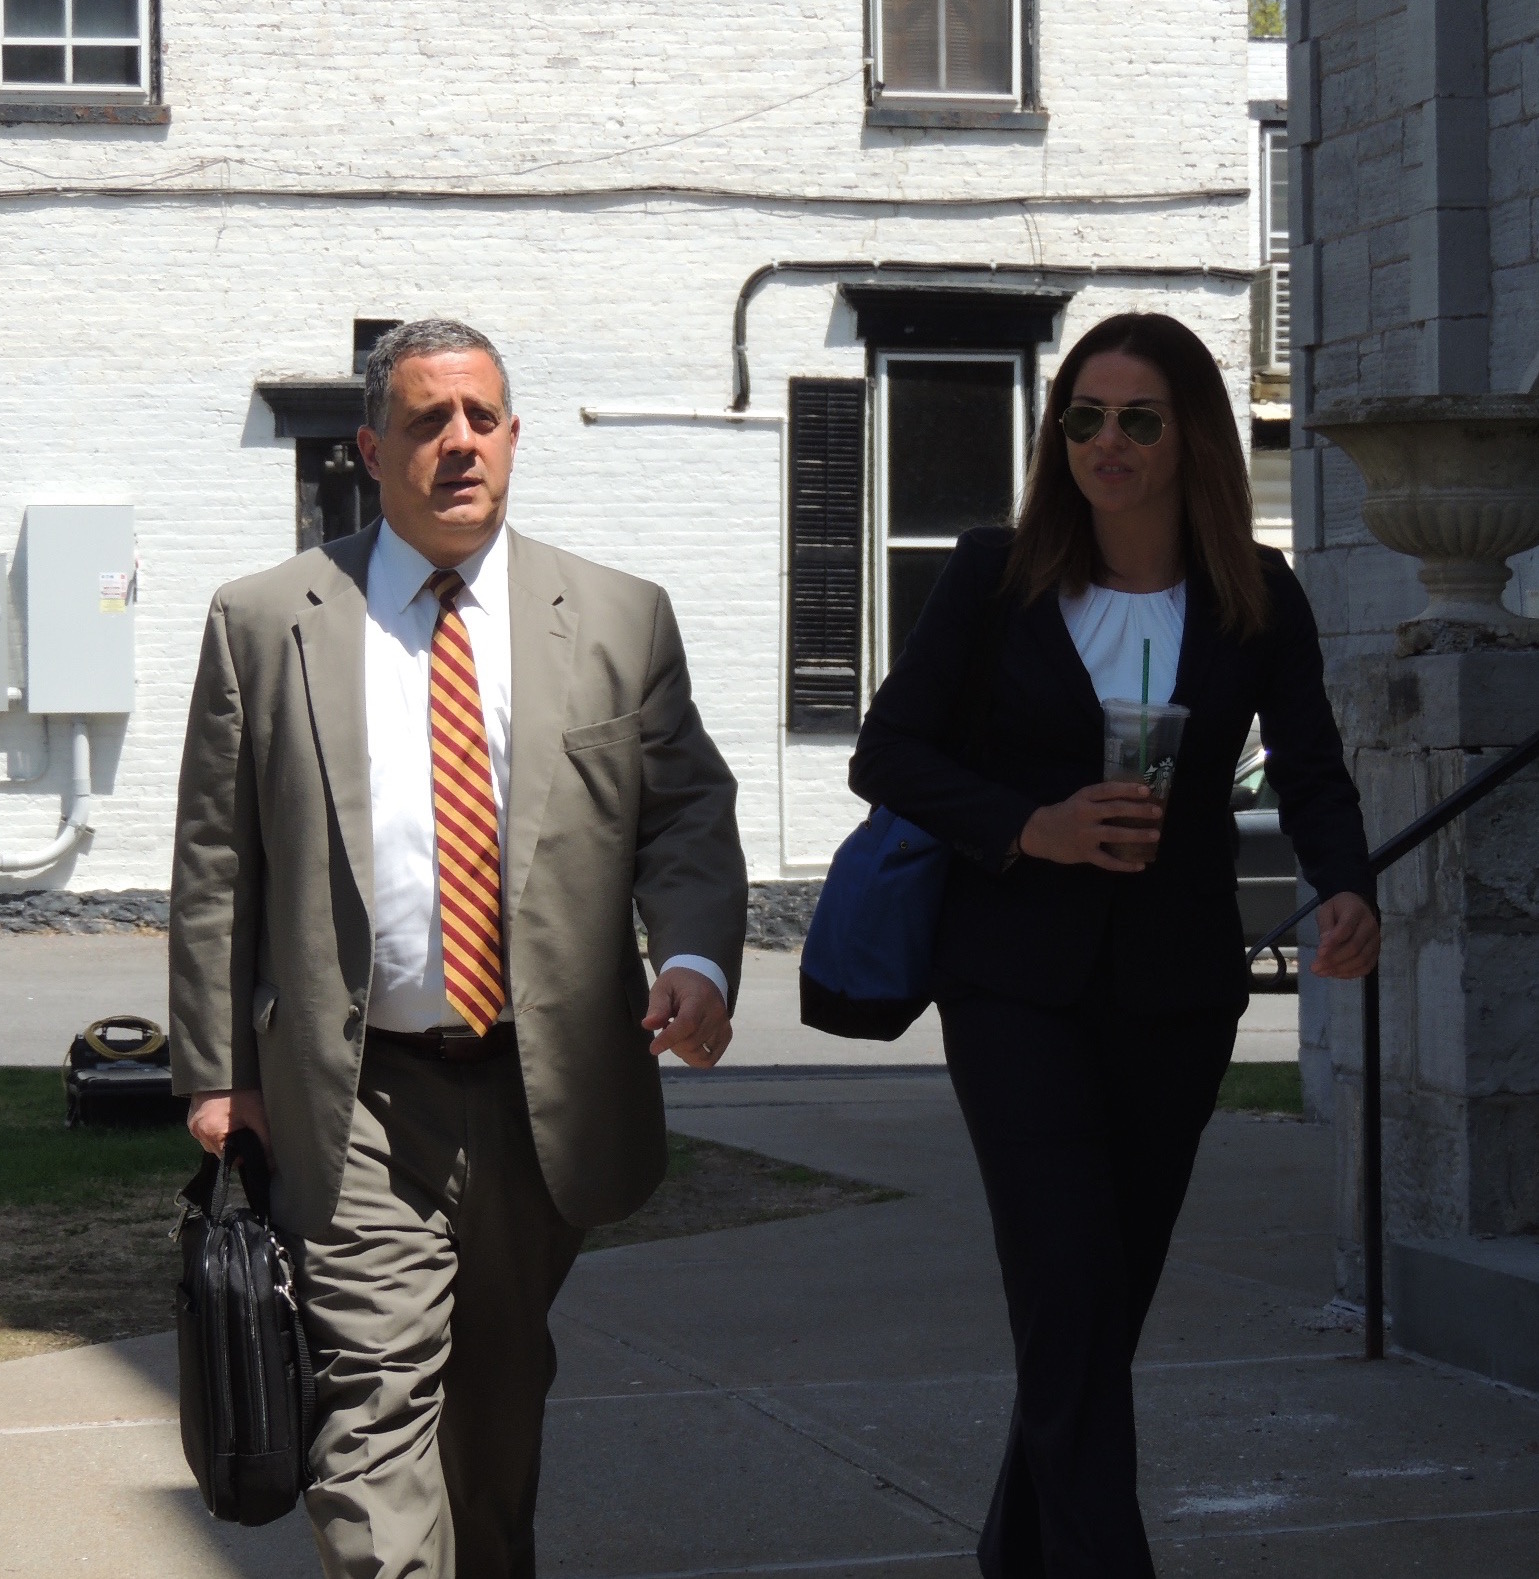 Cost of trial questioned; further digging done as jury concludes sixth day of deliberations